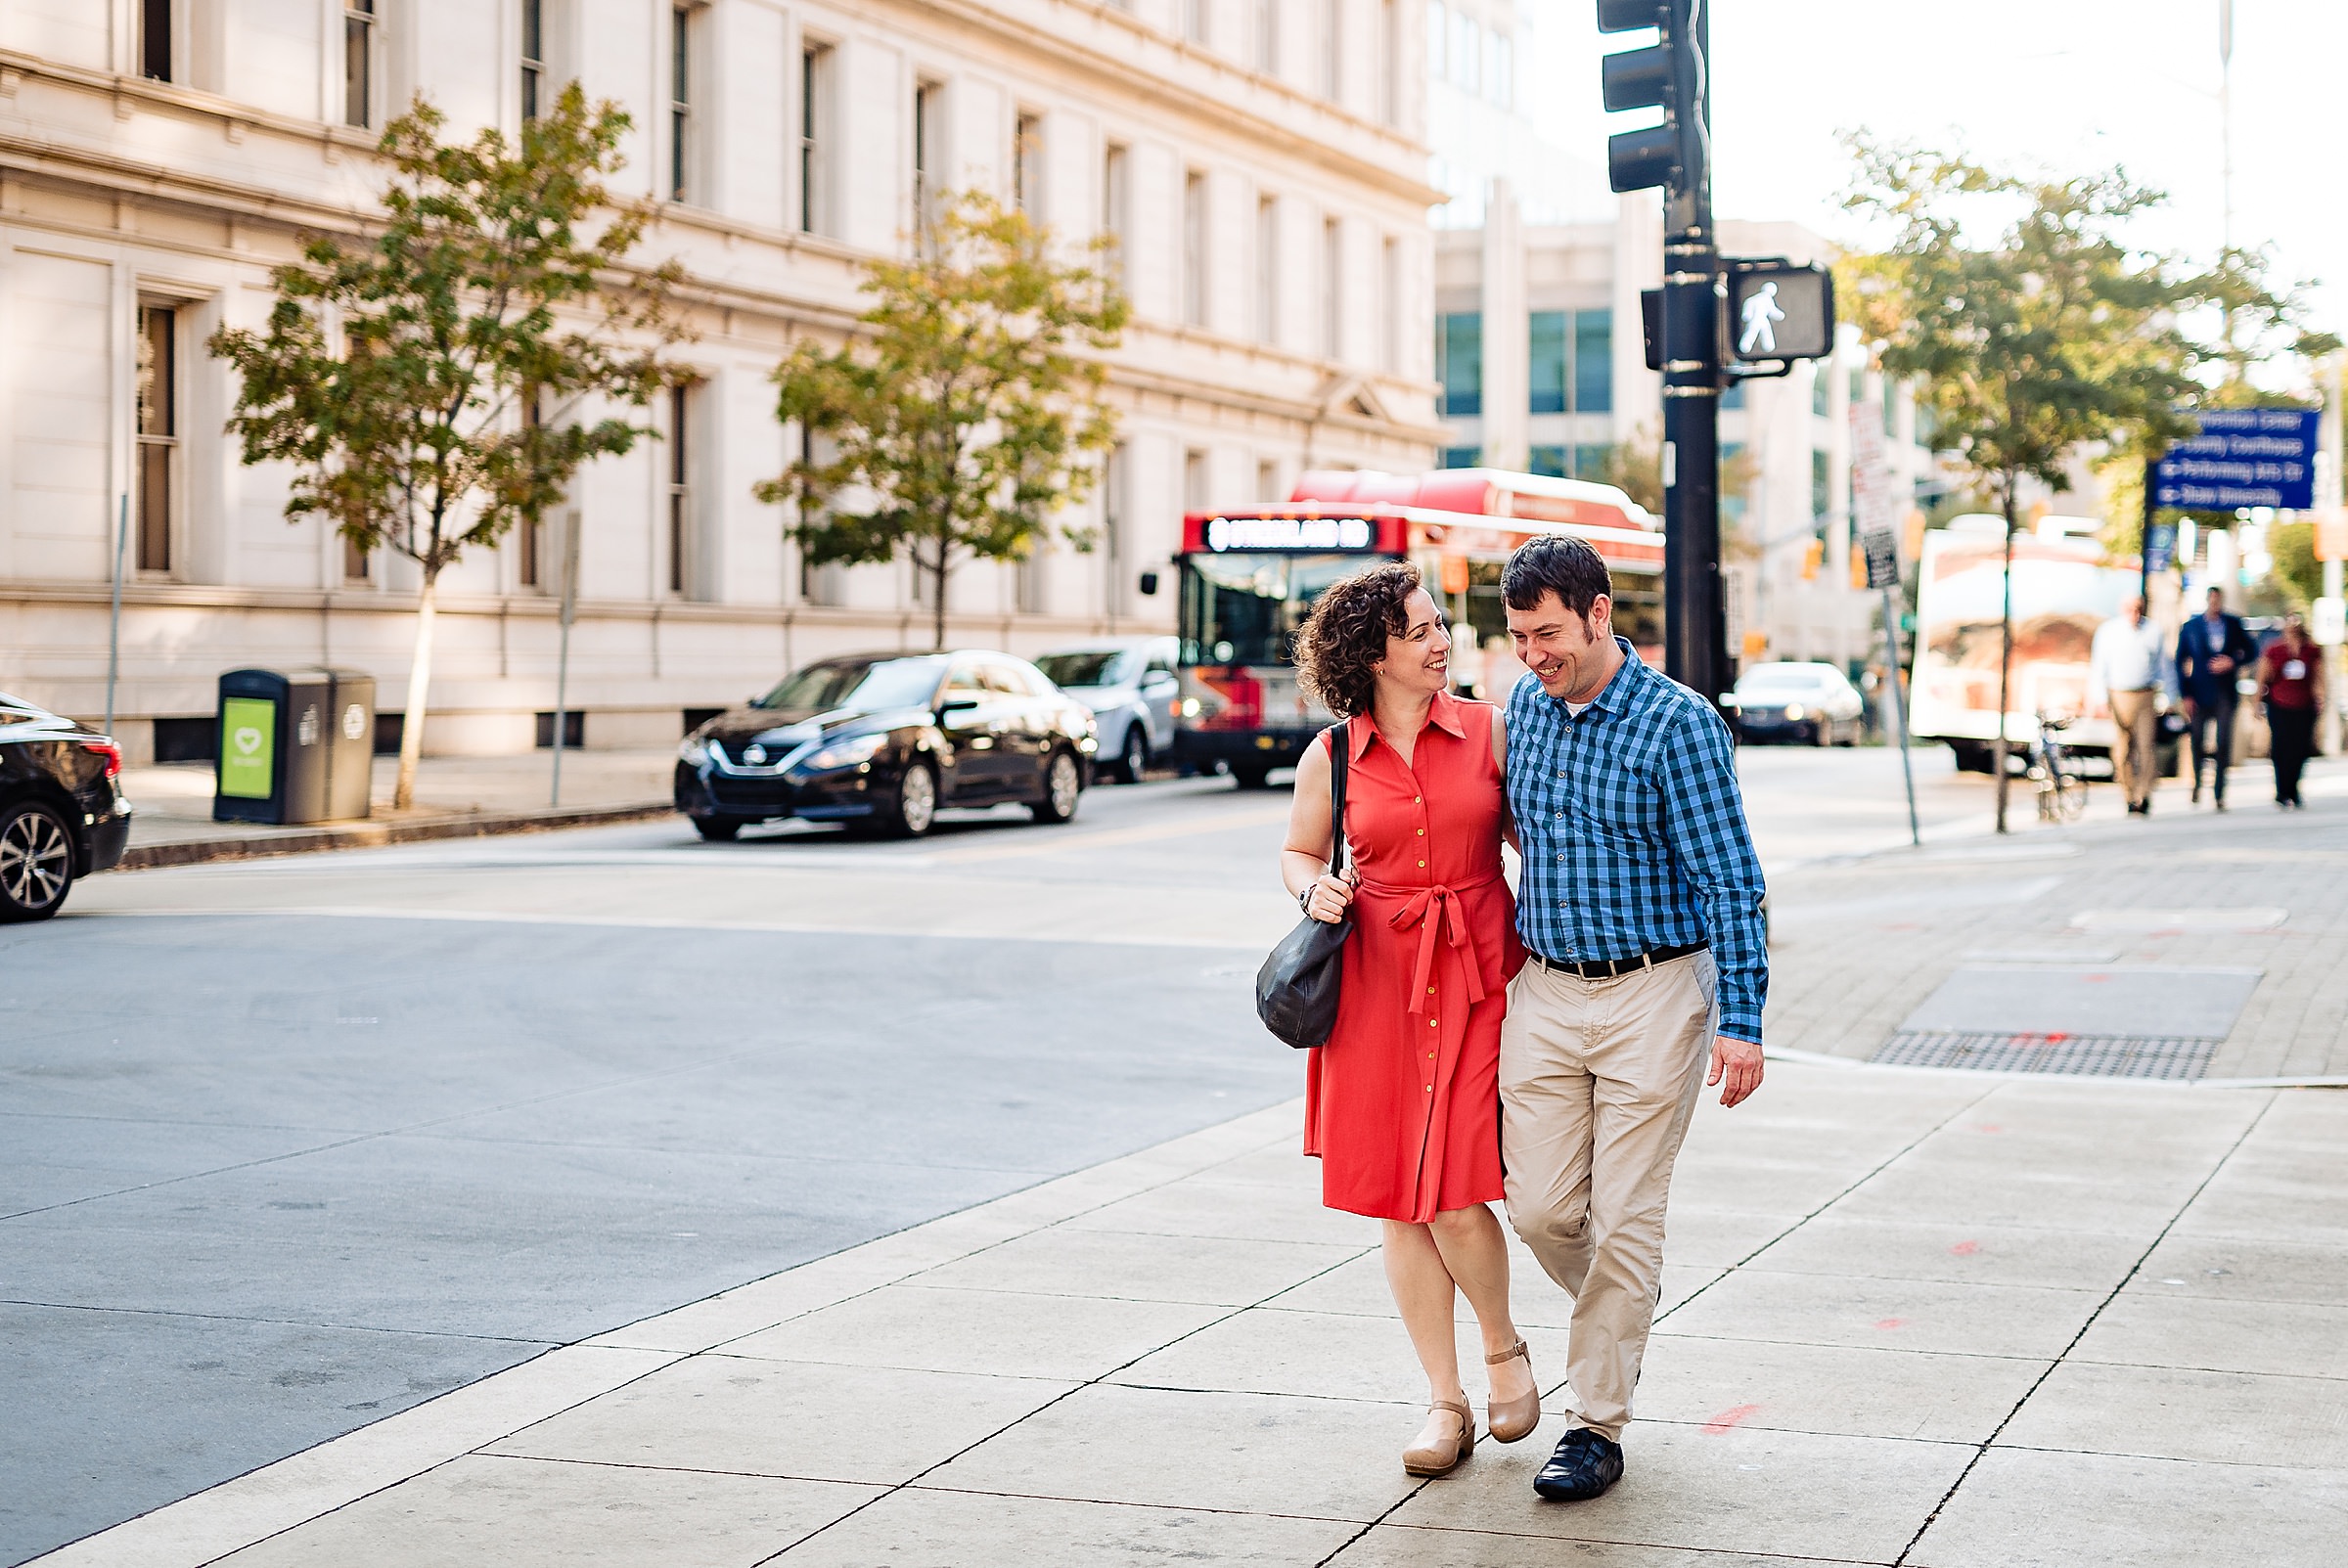 Downtown Raleigh engagement portraits, Get the License, kivusandcamera.com, License to Wed, Marriage license, Mecca Raleigh Engagement Photos, Raleigh Engagement Photos, Raleigh wedding photographer, Unique engagement photo ideas, Whiskey Kitchen Engagement Photos